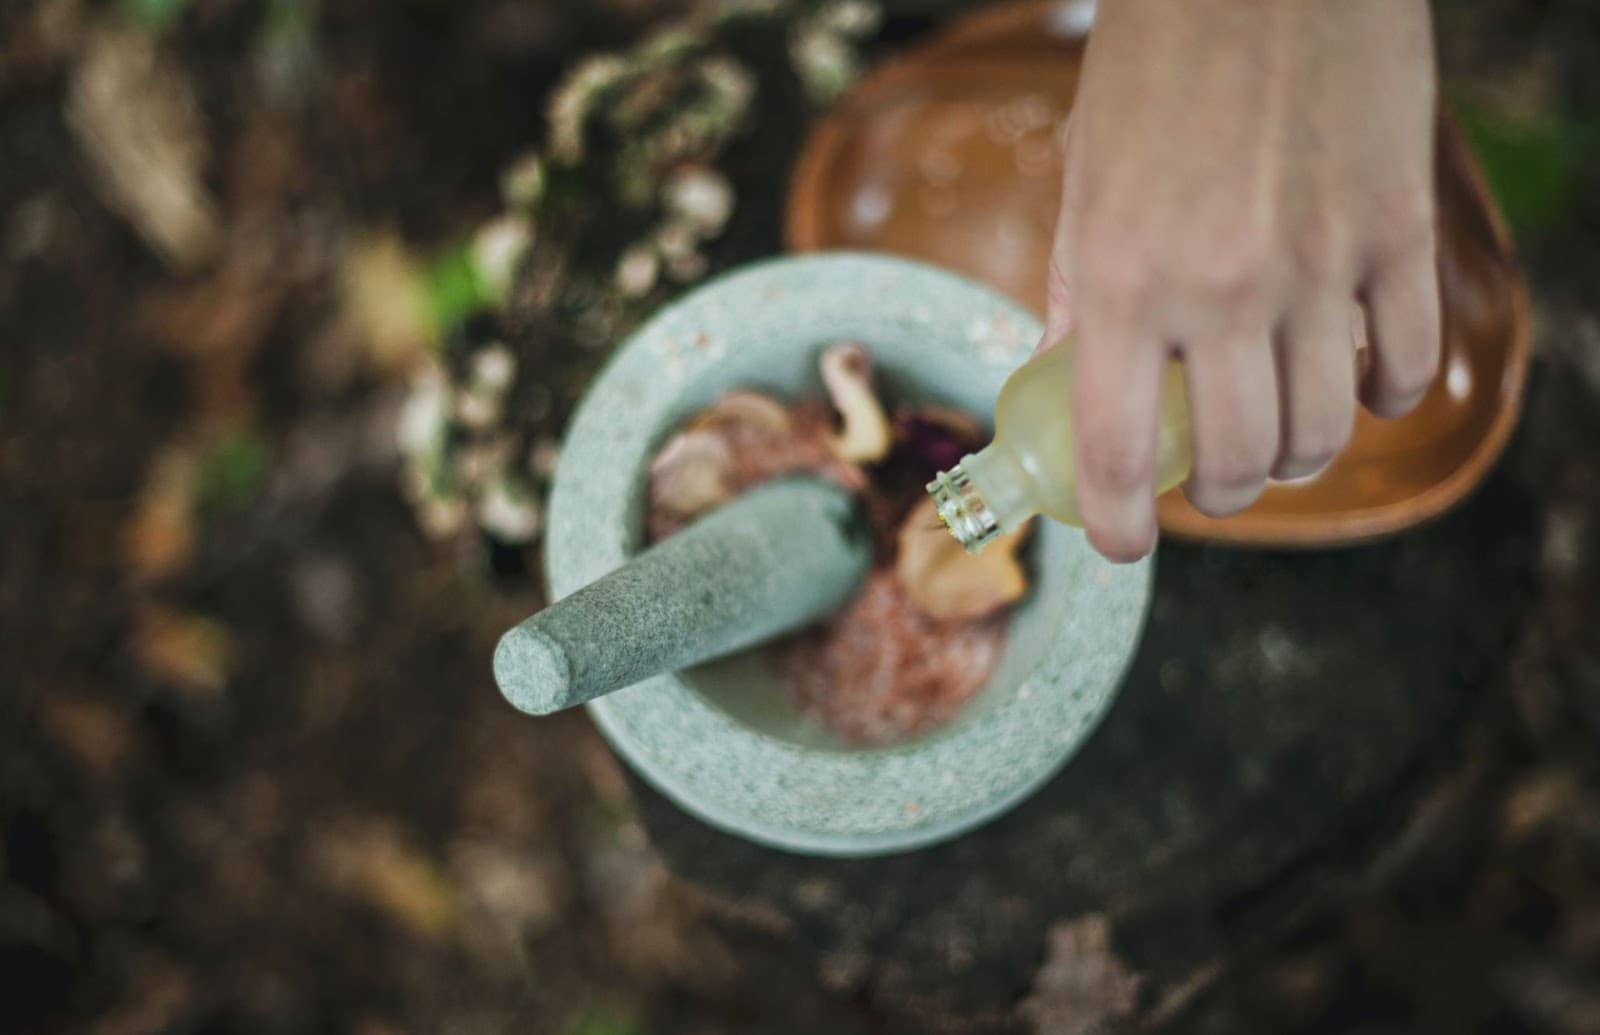 Essential Oil being poured into pestle and mortar